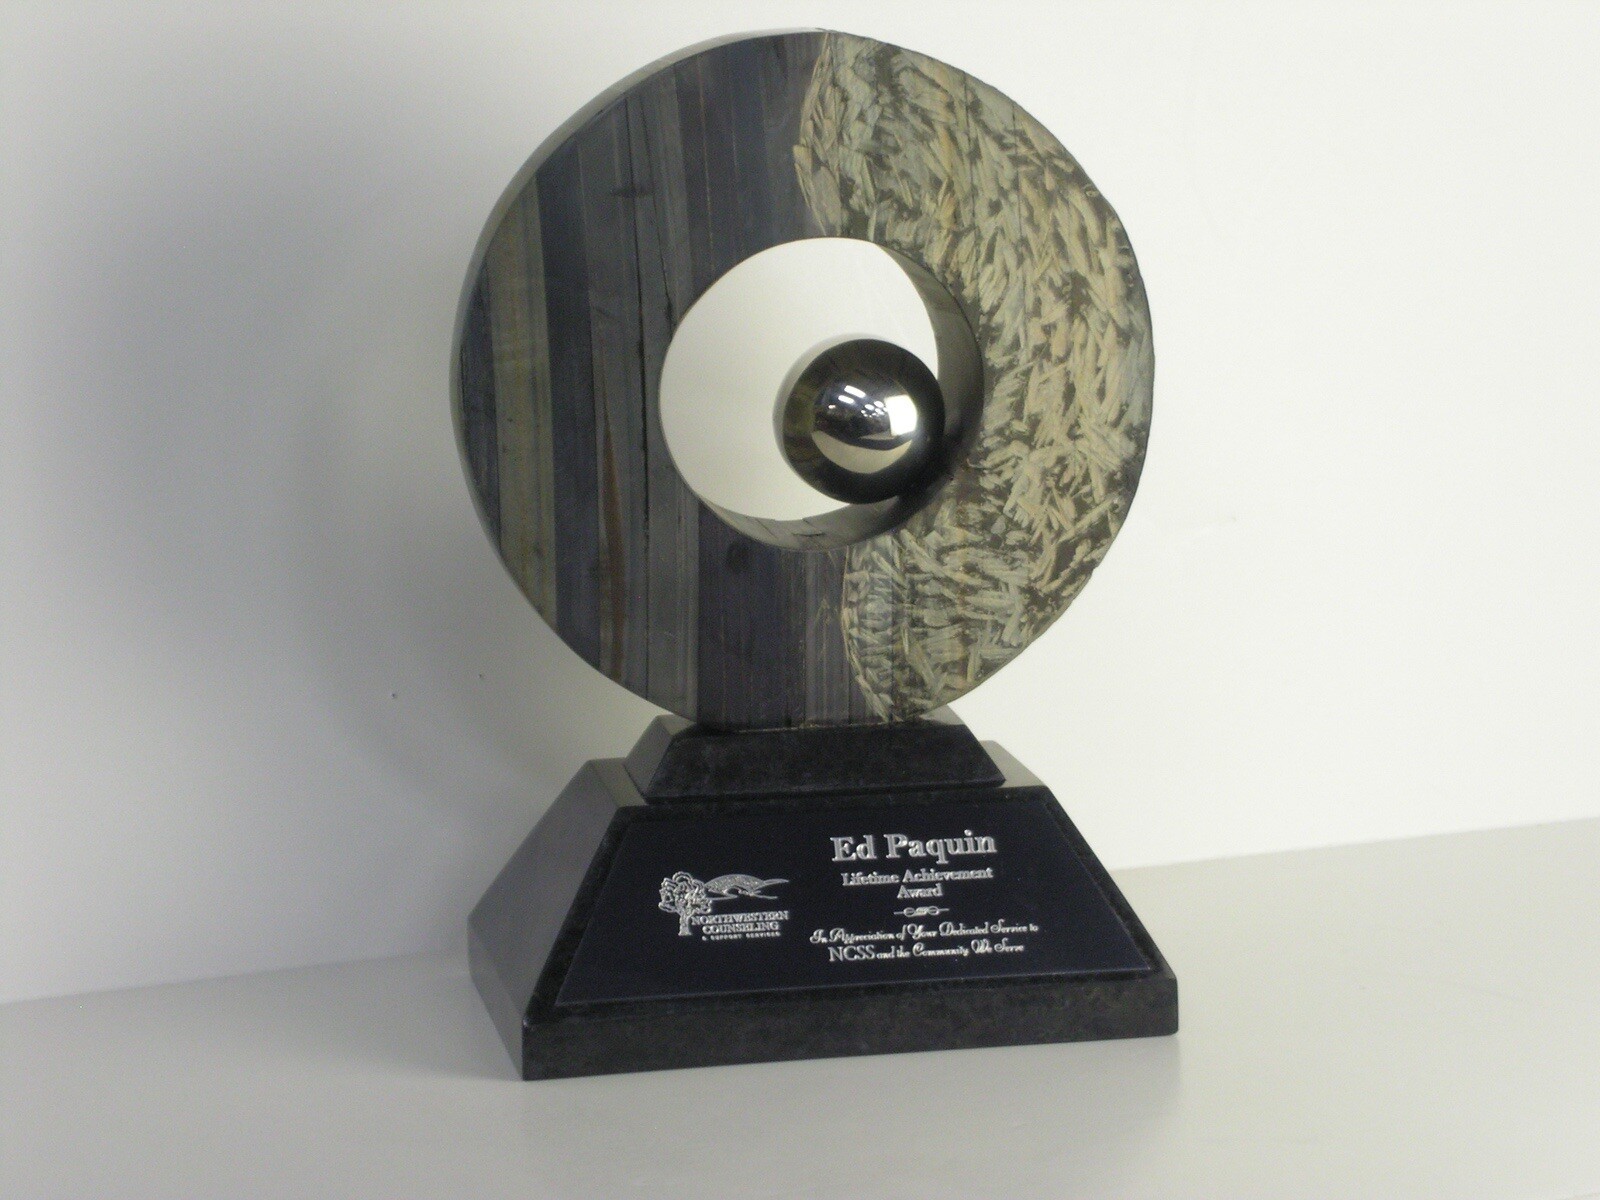 Stone and Metal Award in 3 Sizes